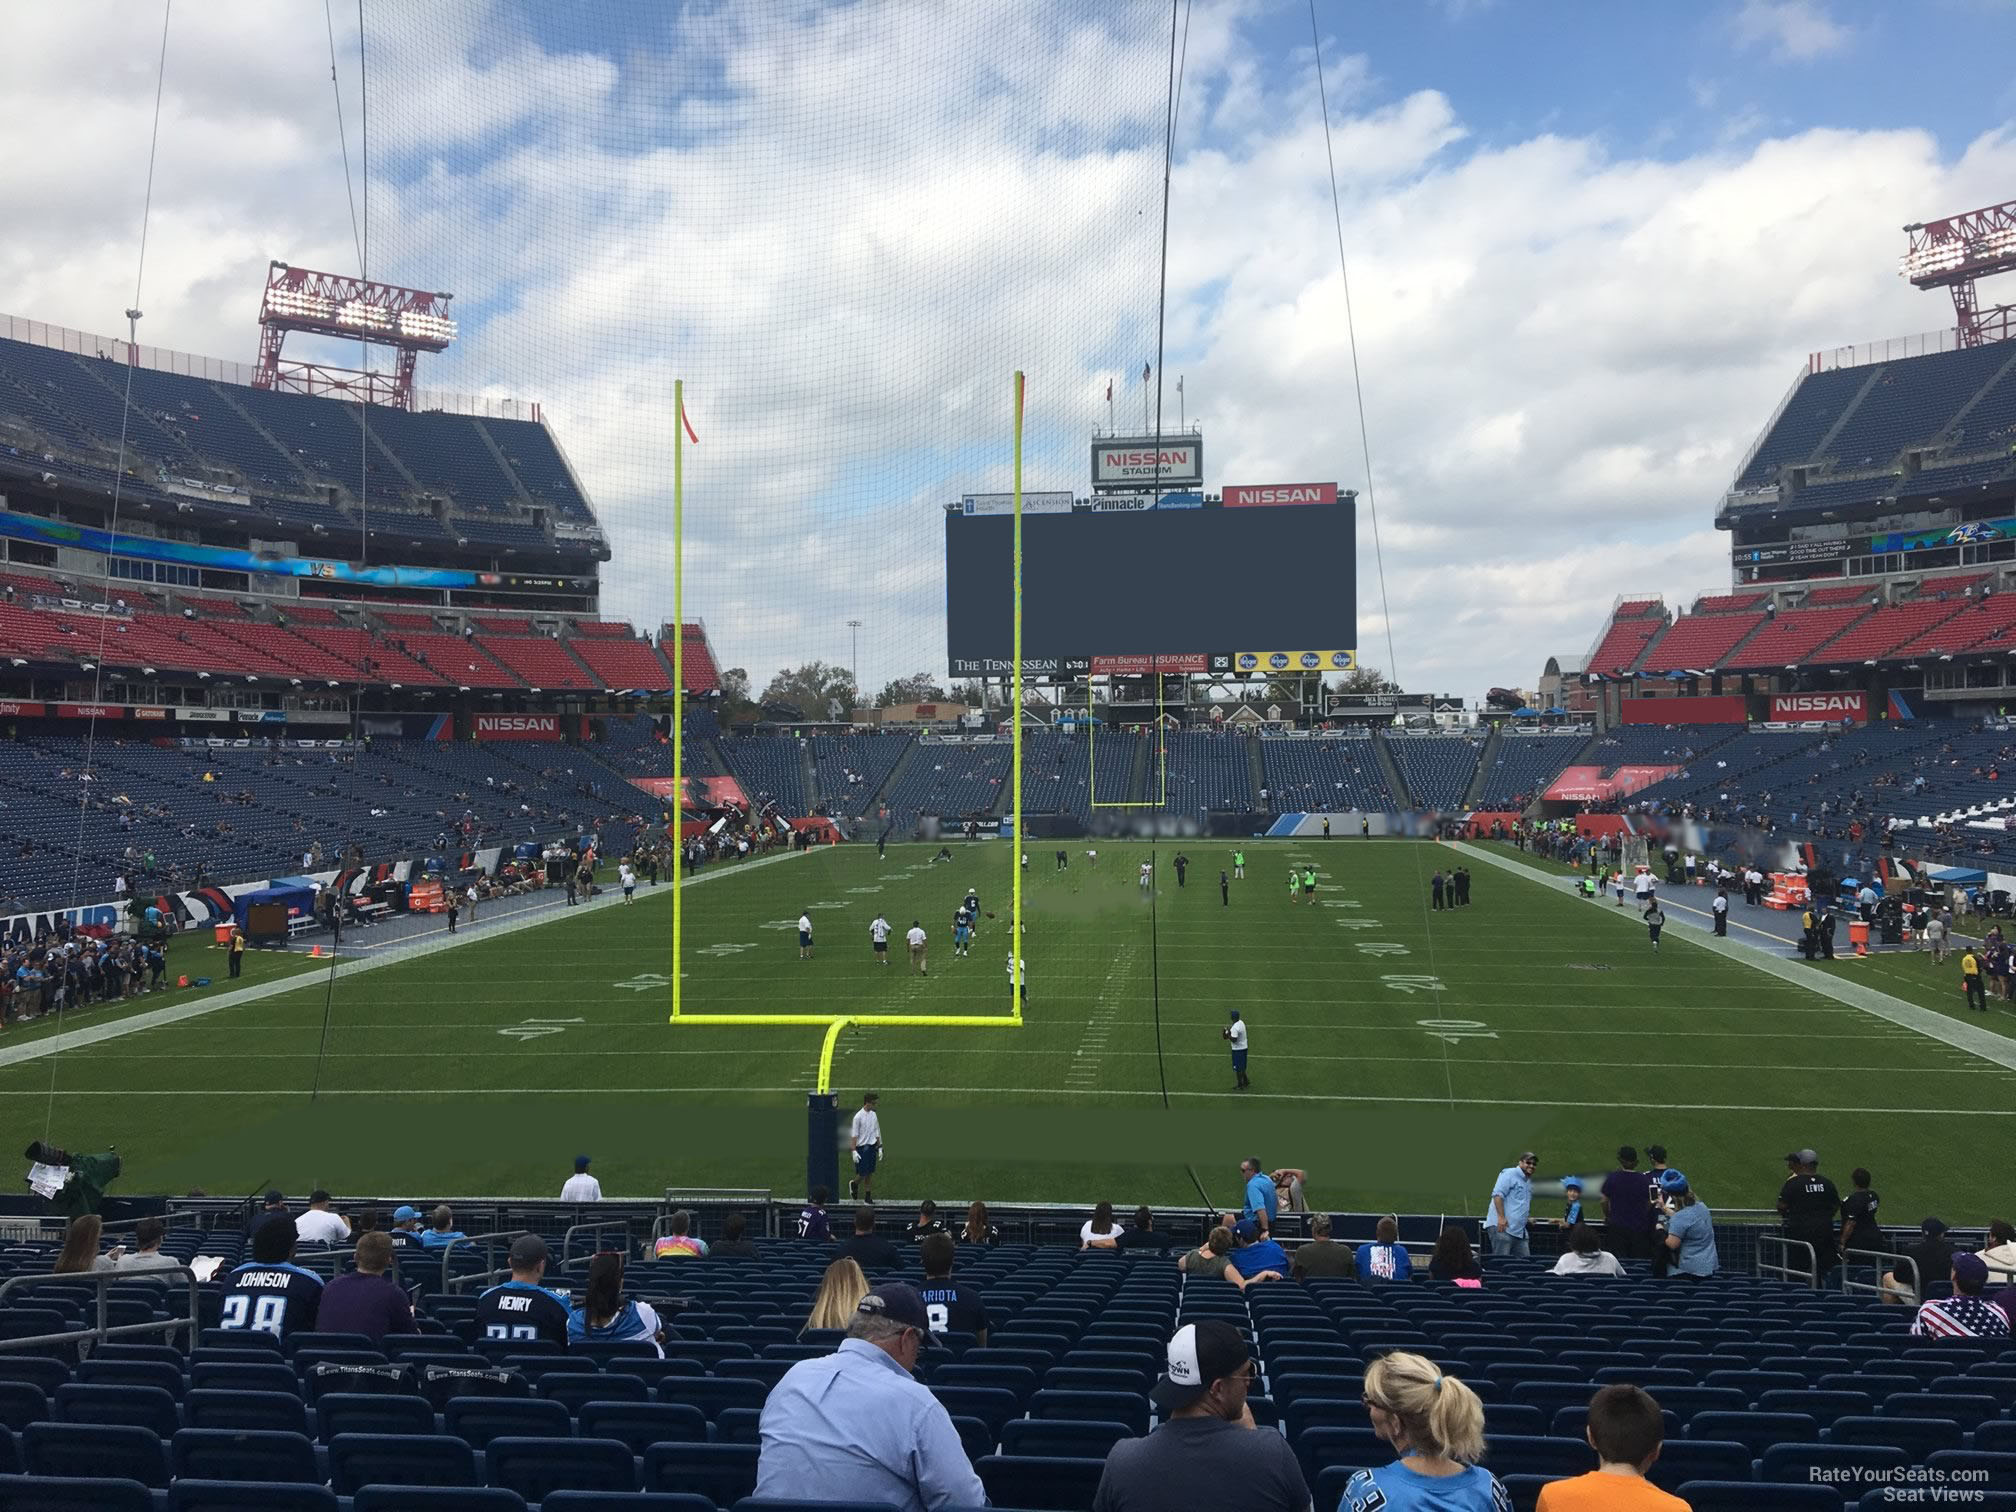 section 123, row aa seat view  for football - nissan stadium